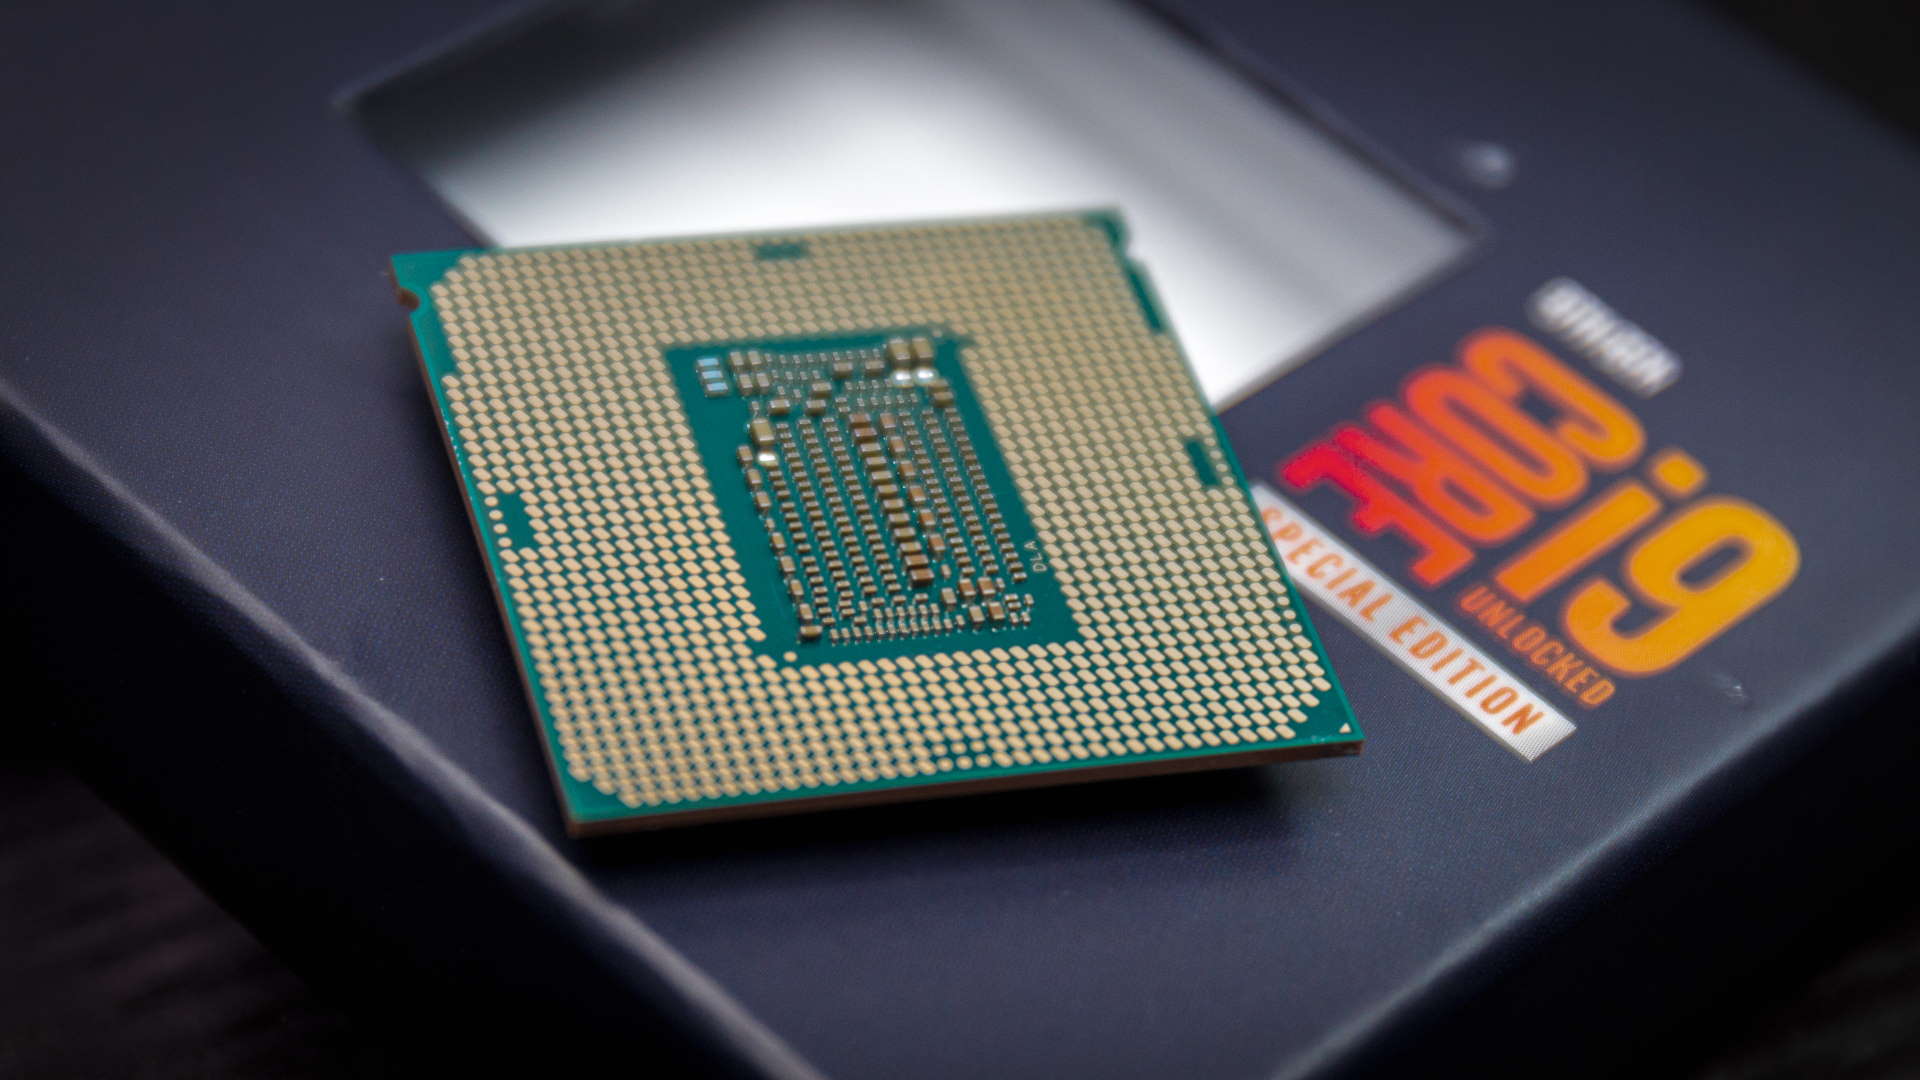 Intel Core i9 9900KS CPU review: beating the silicon lottery with 